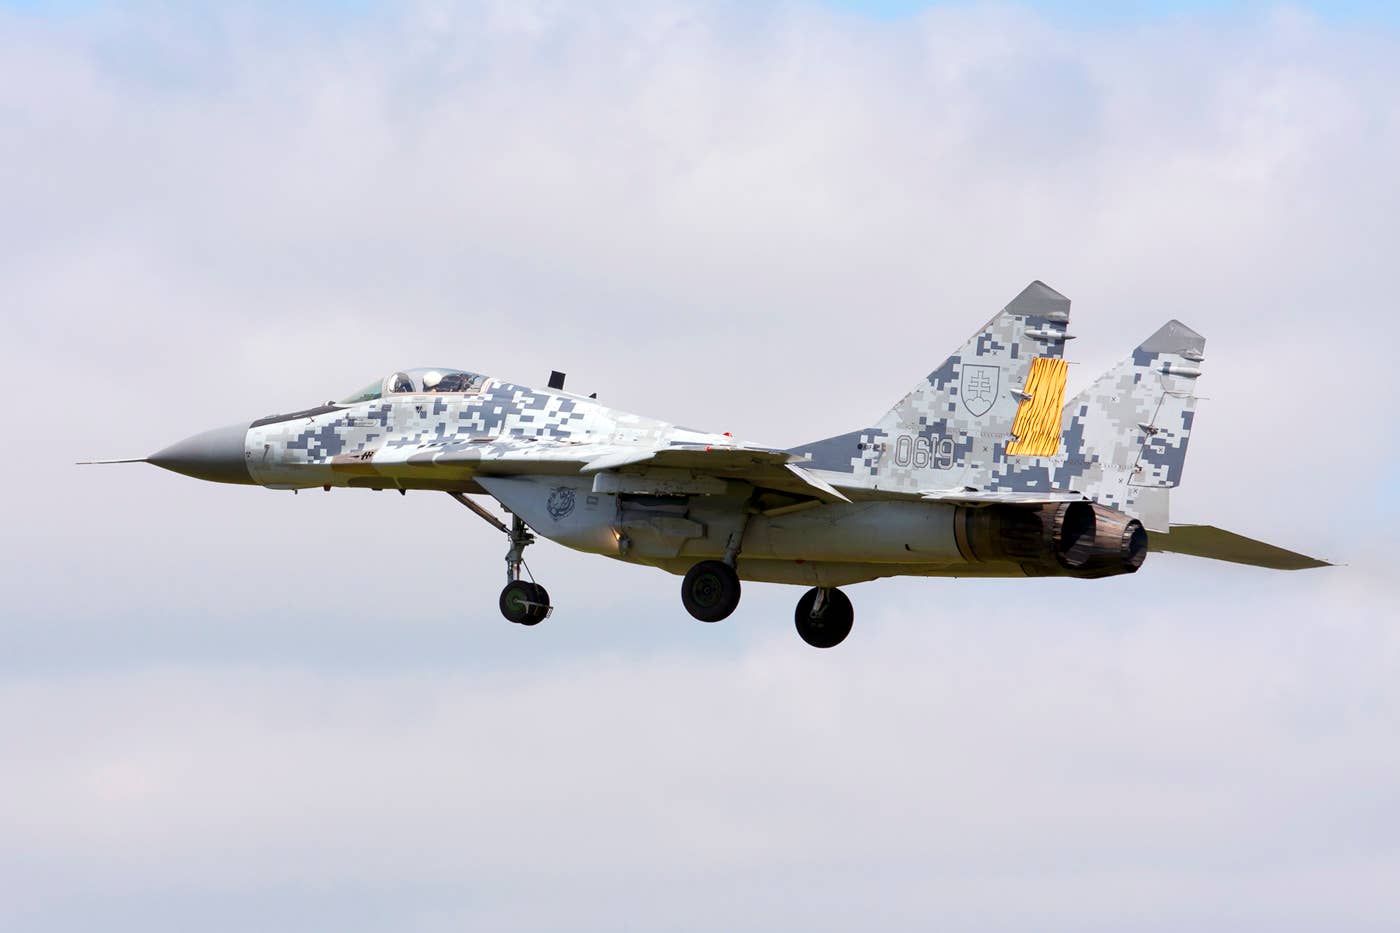 Post-modernization, some Slovakian MiGs received this unique ‘digital’ camouflage scheme. This example added tiger stripes on the rudders for the 2011 NATO Tiger Meet. <em>Rob Schleiffert/Wikimedia Commons</em>